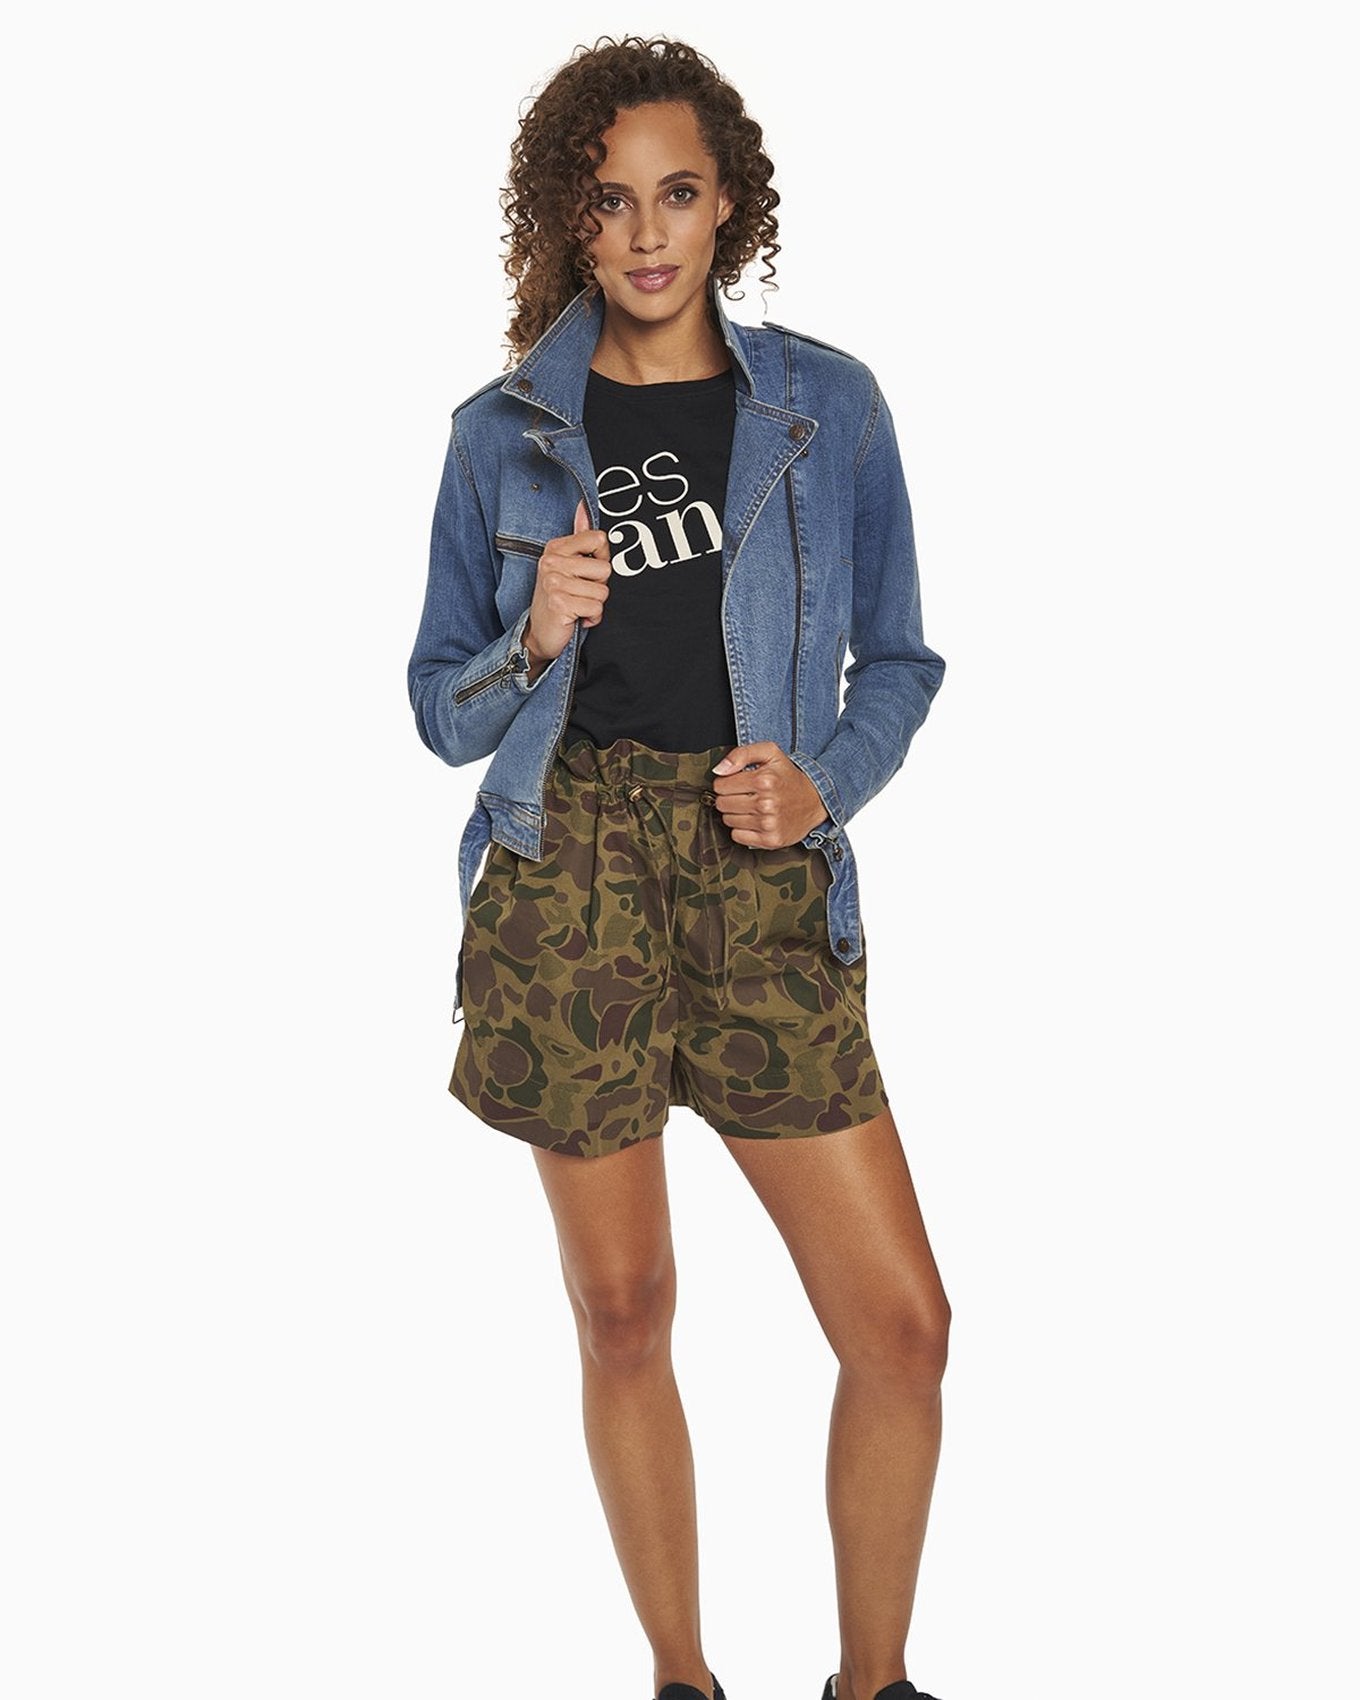 YesAnd Organic Print Paperbag Shorts Shorts in color Romantic Camo and shape shorts